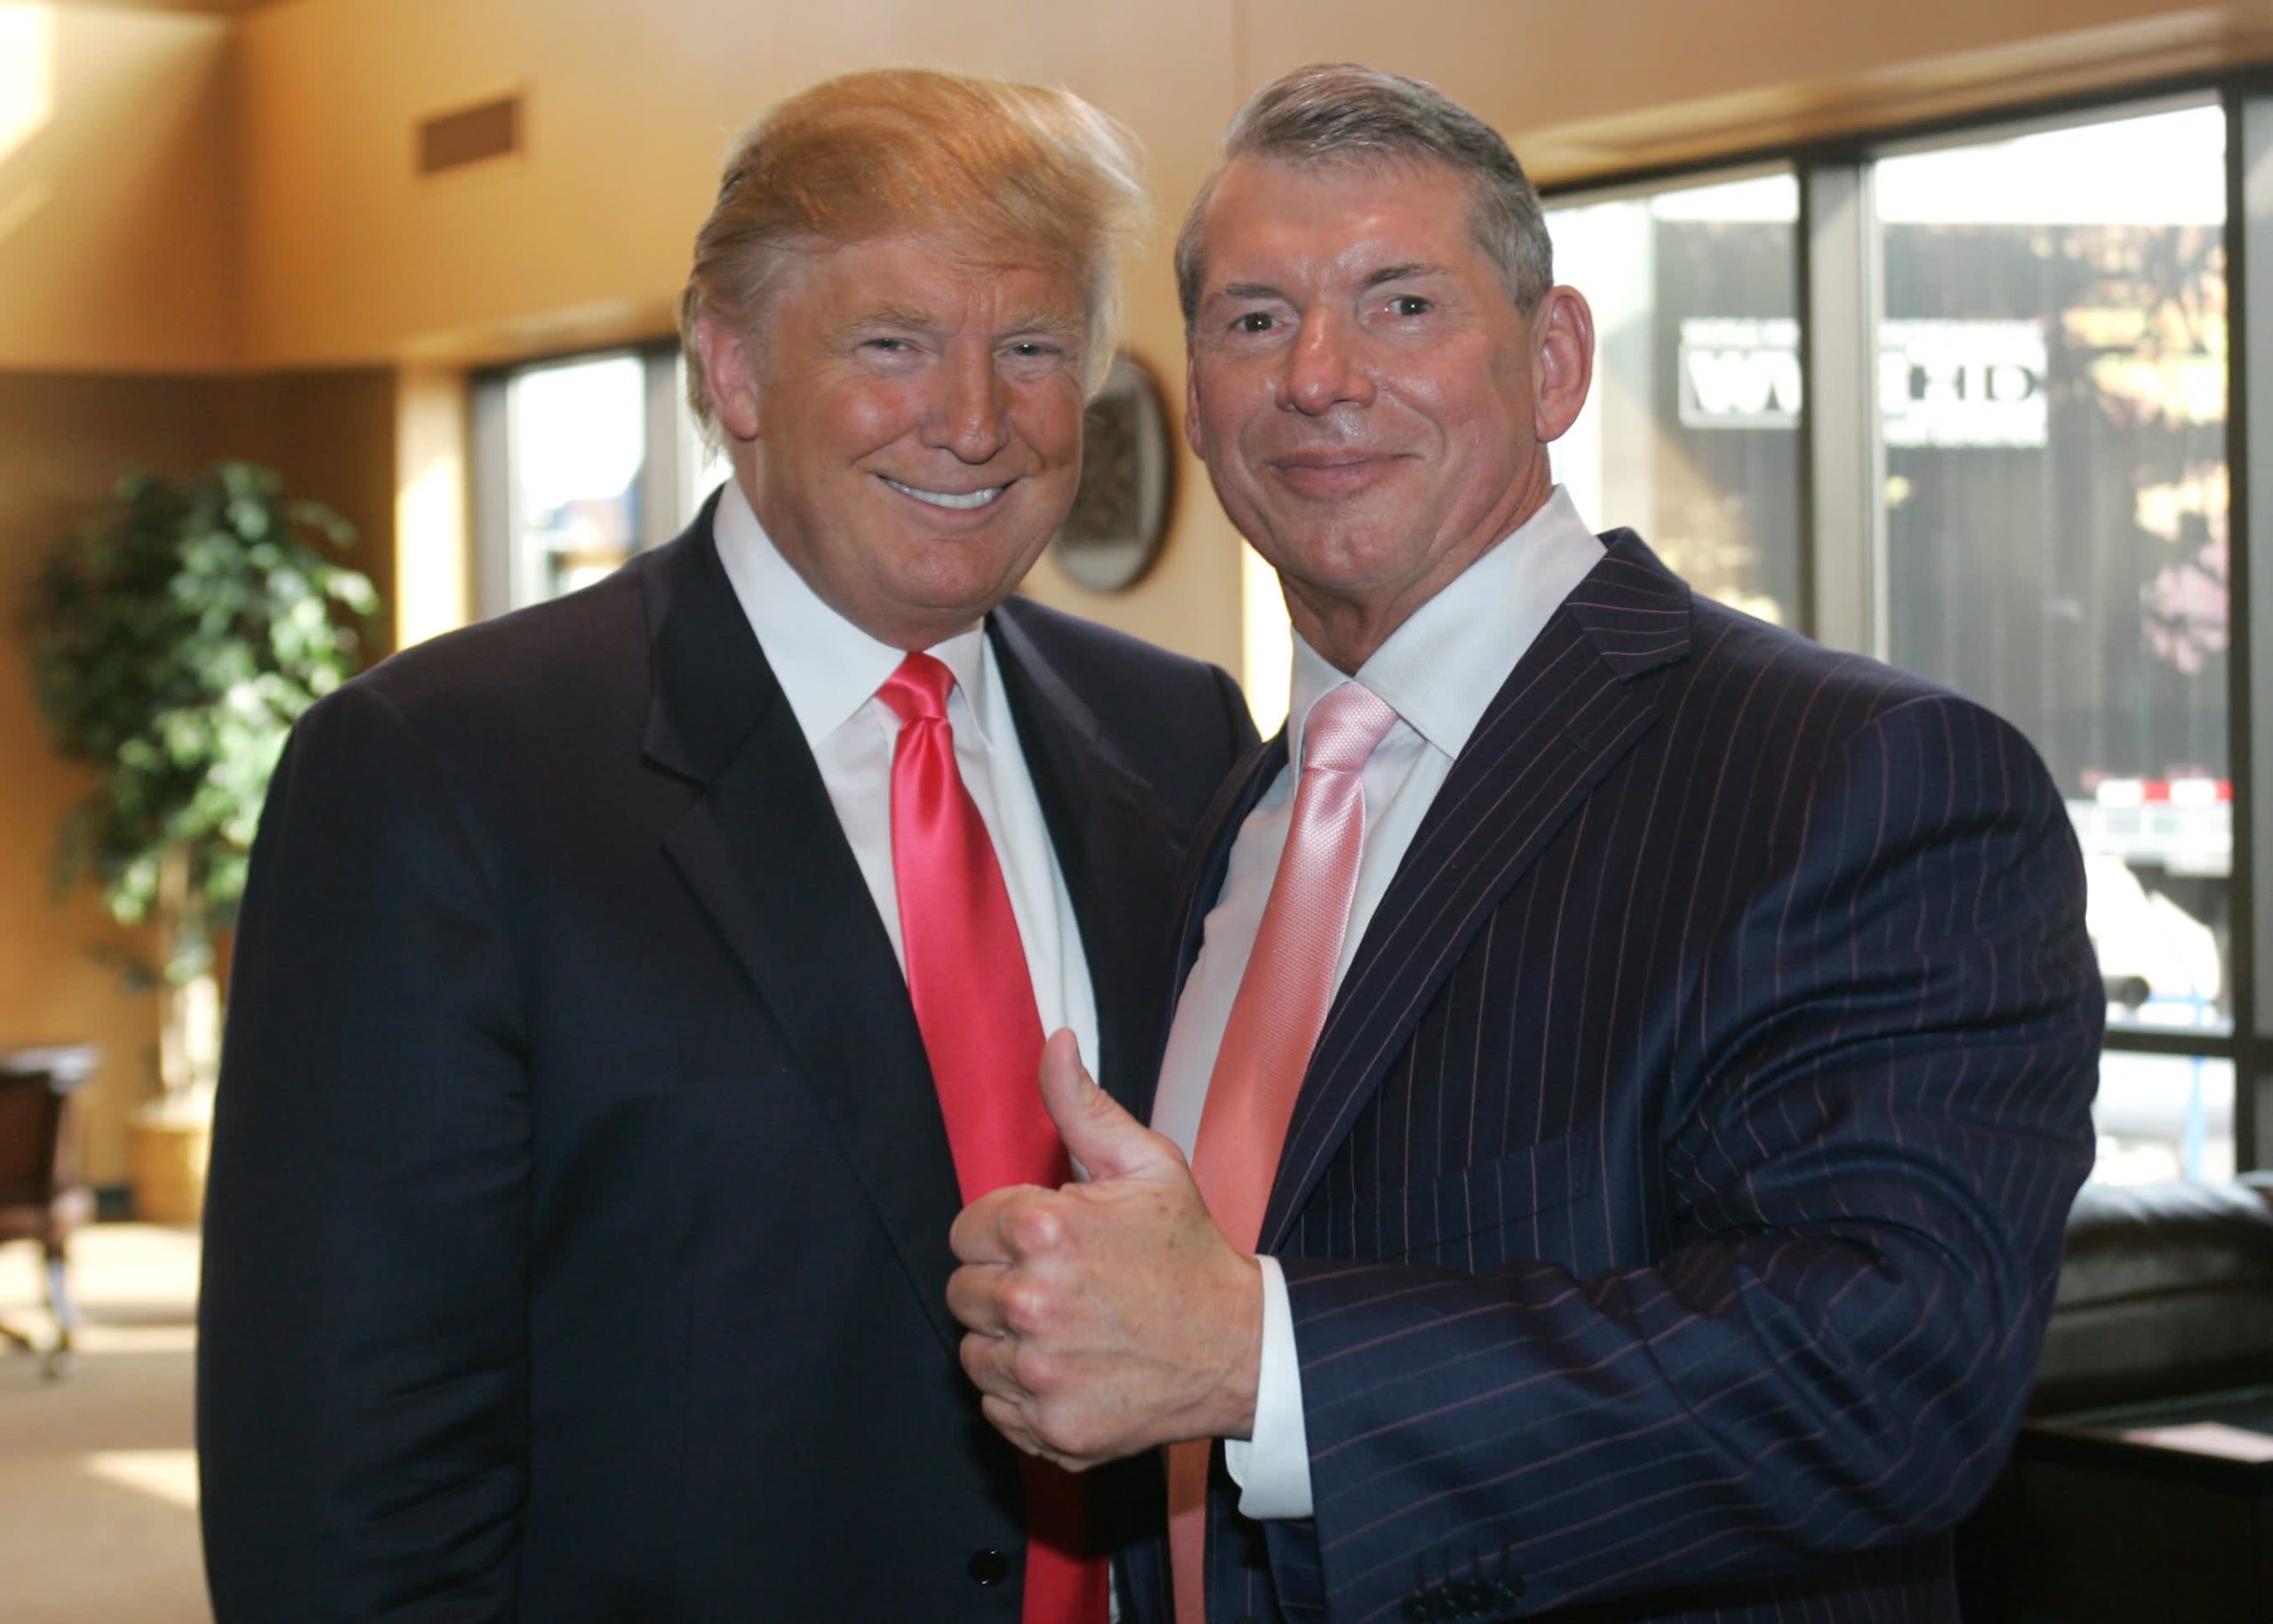 REPORT: Vince McMahon donated $5 million in unrecorded company expenses to Donald Trump's charity